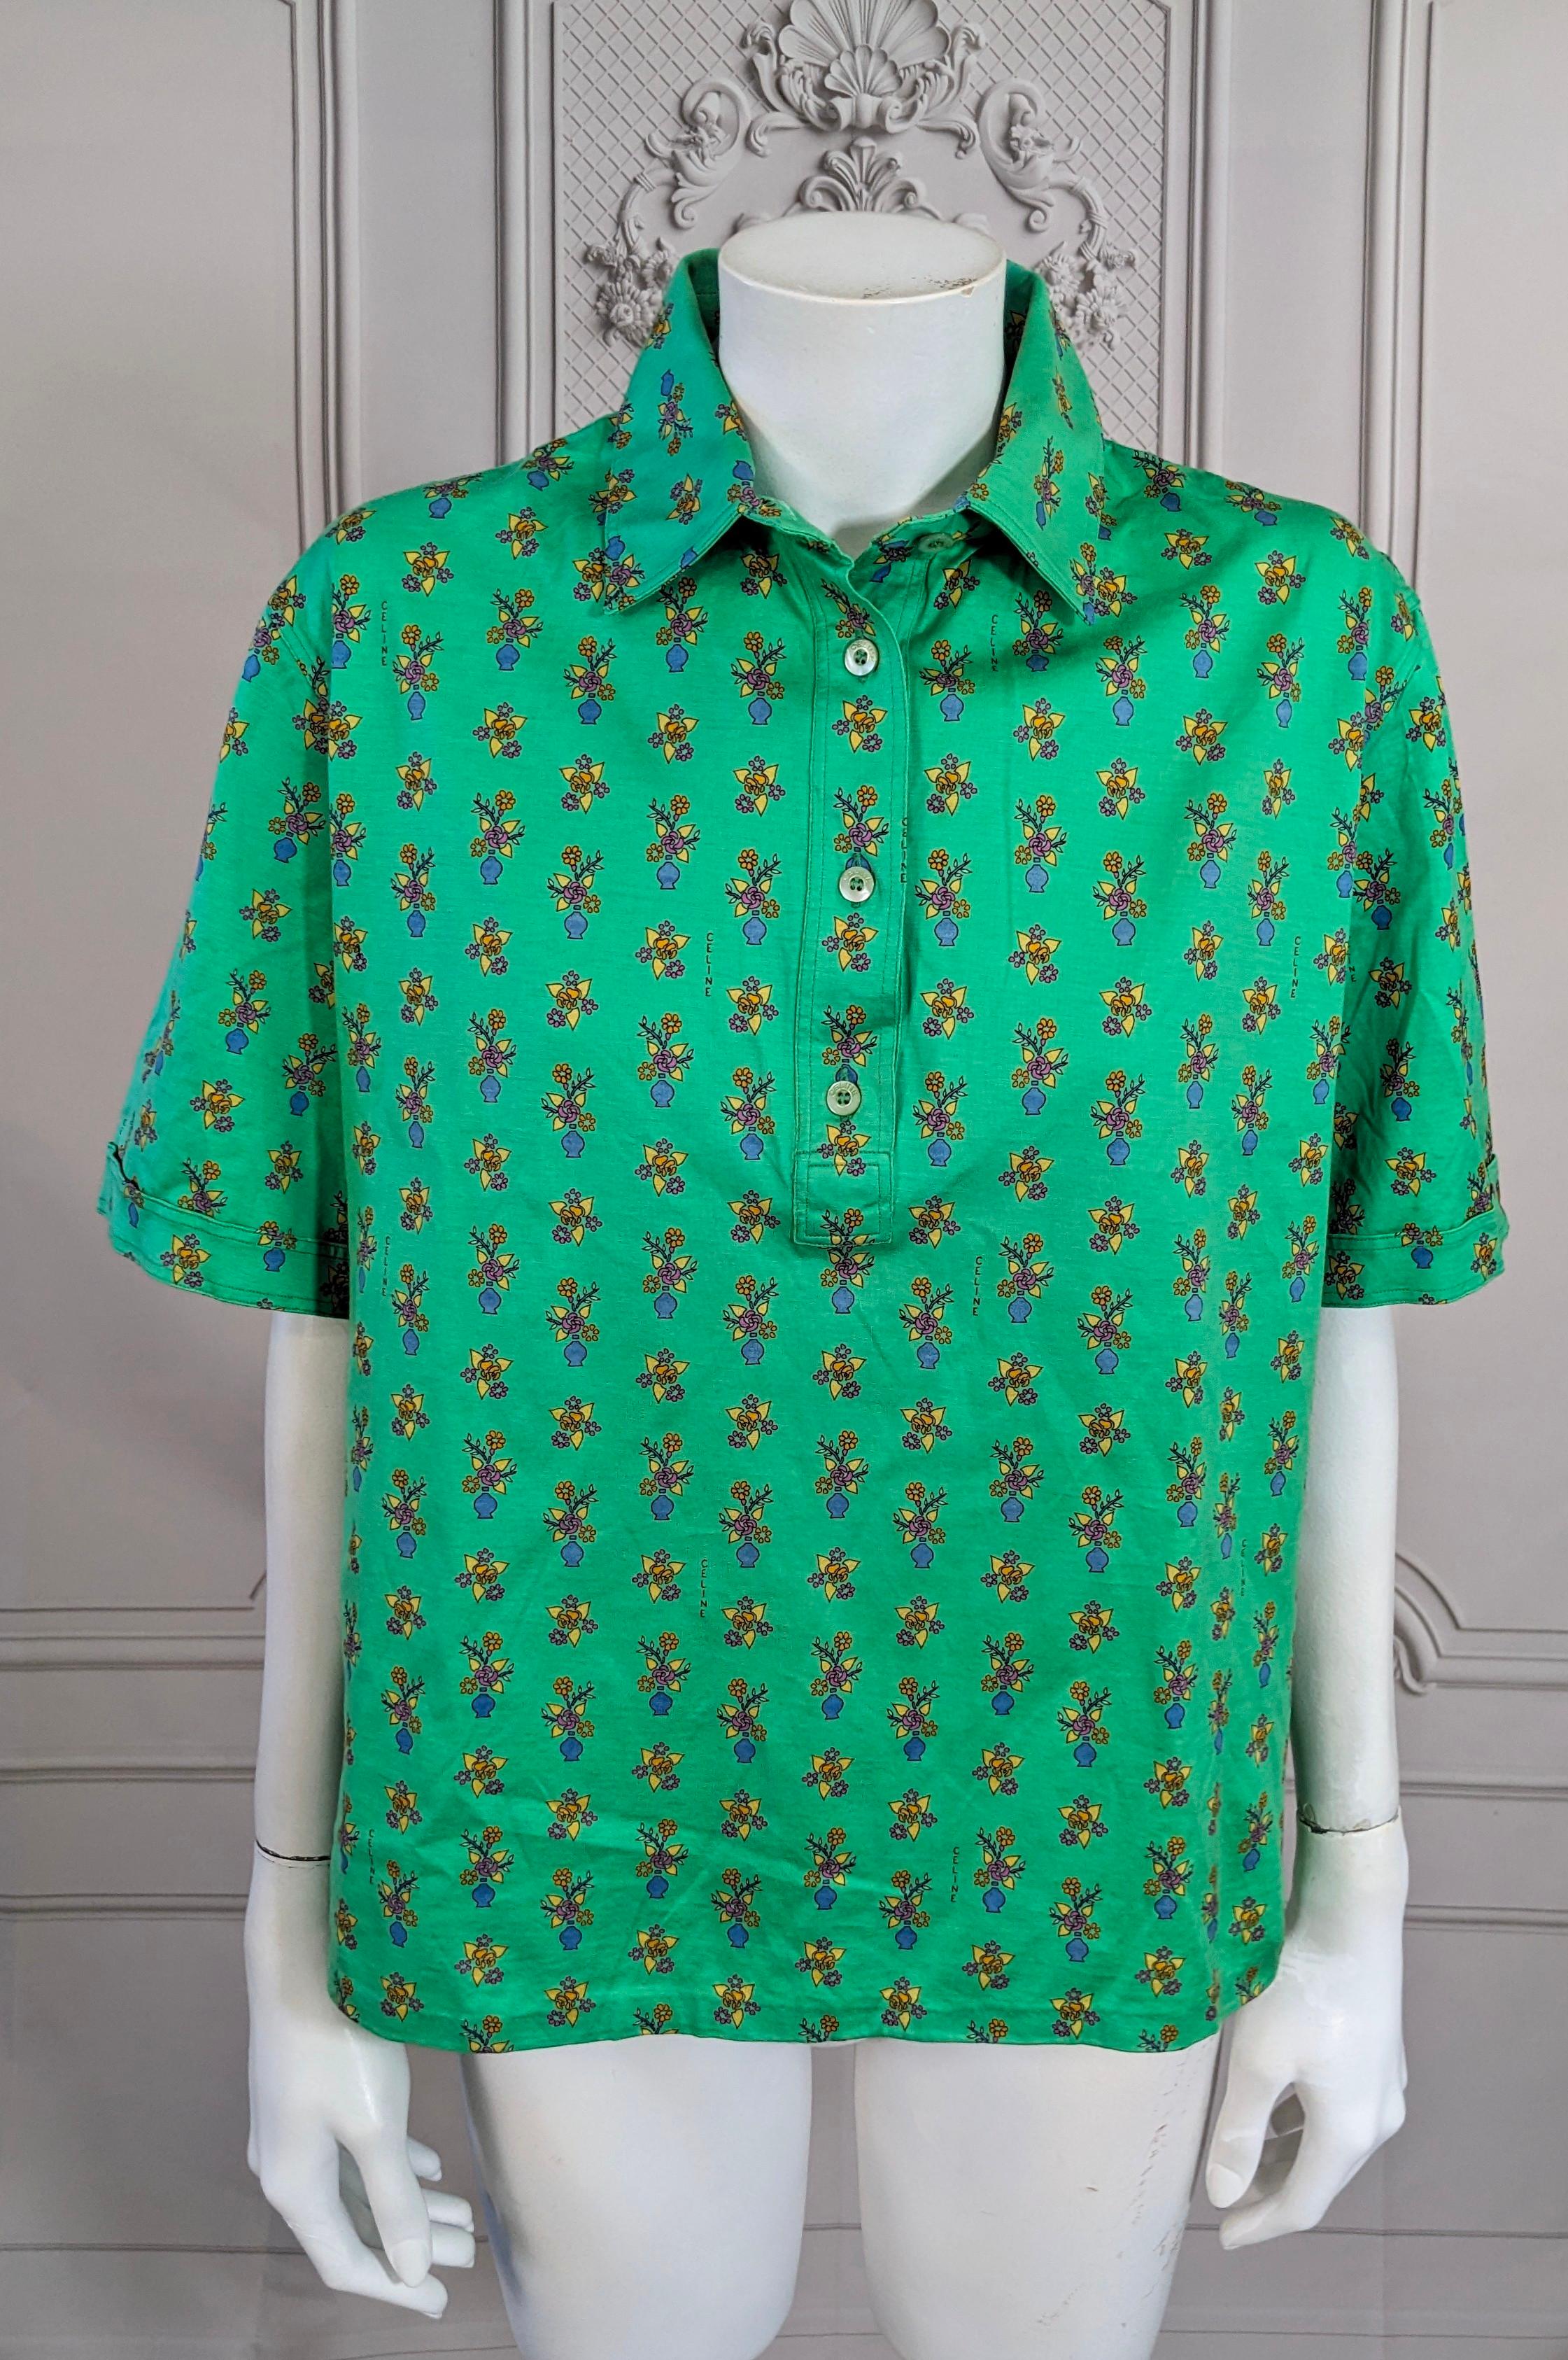 Celine cotton short sleeved polo. Of bright green cotton lisle overall printed with floral bouquets and flower vases, in yellow, red, blues and greens. Logo signed Celine inside the print. Mother of pearl Celine buttons. Very Good Condition. Size 46